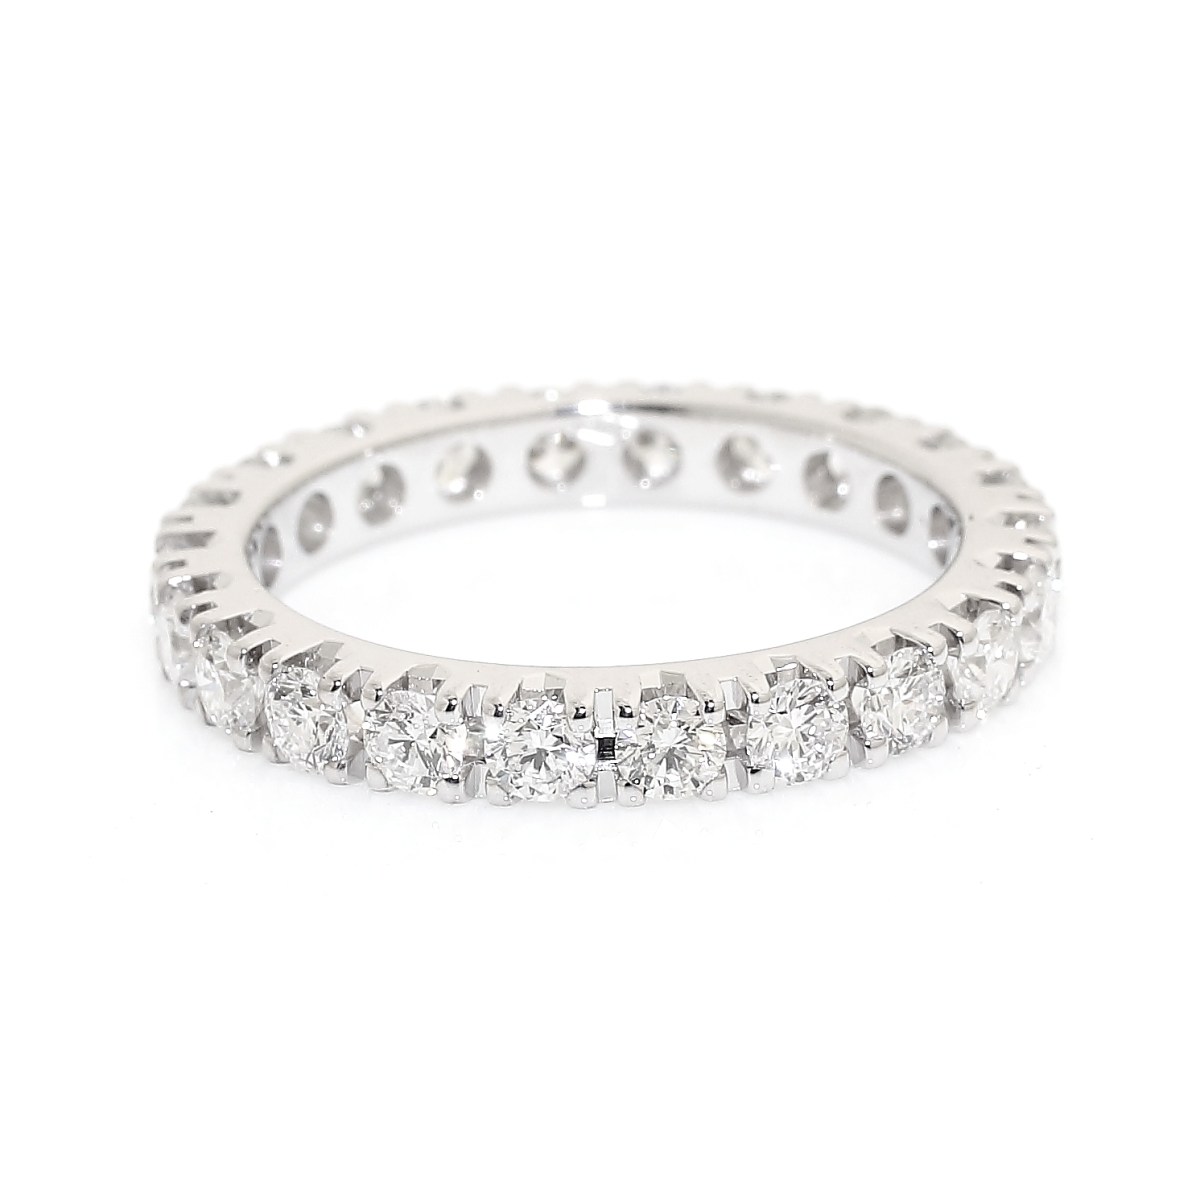 750 Mill. White Gold Ring with 1,46 Ct. Diamonds